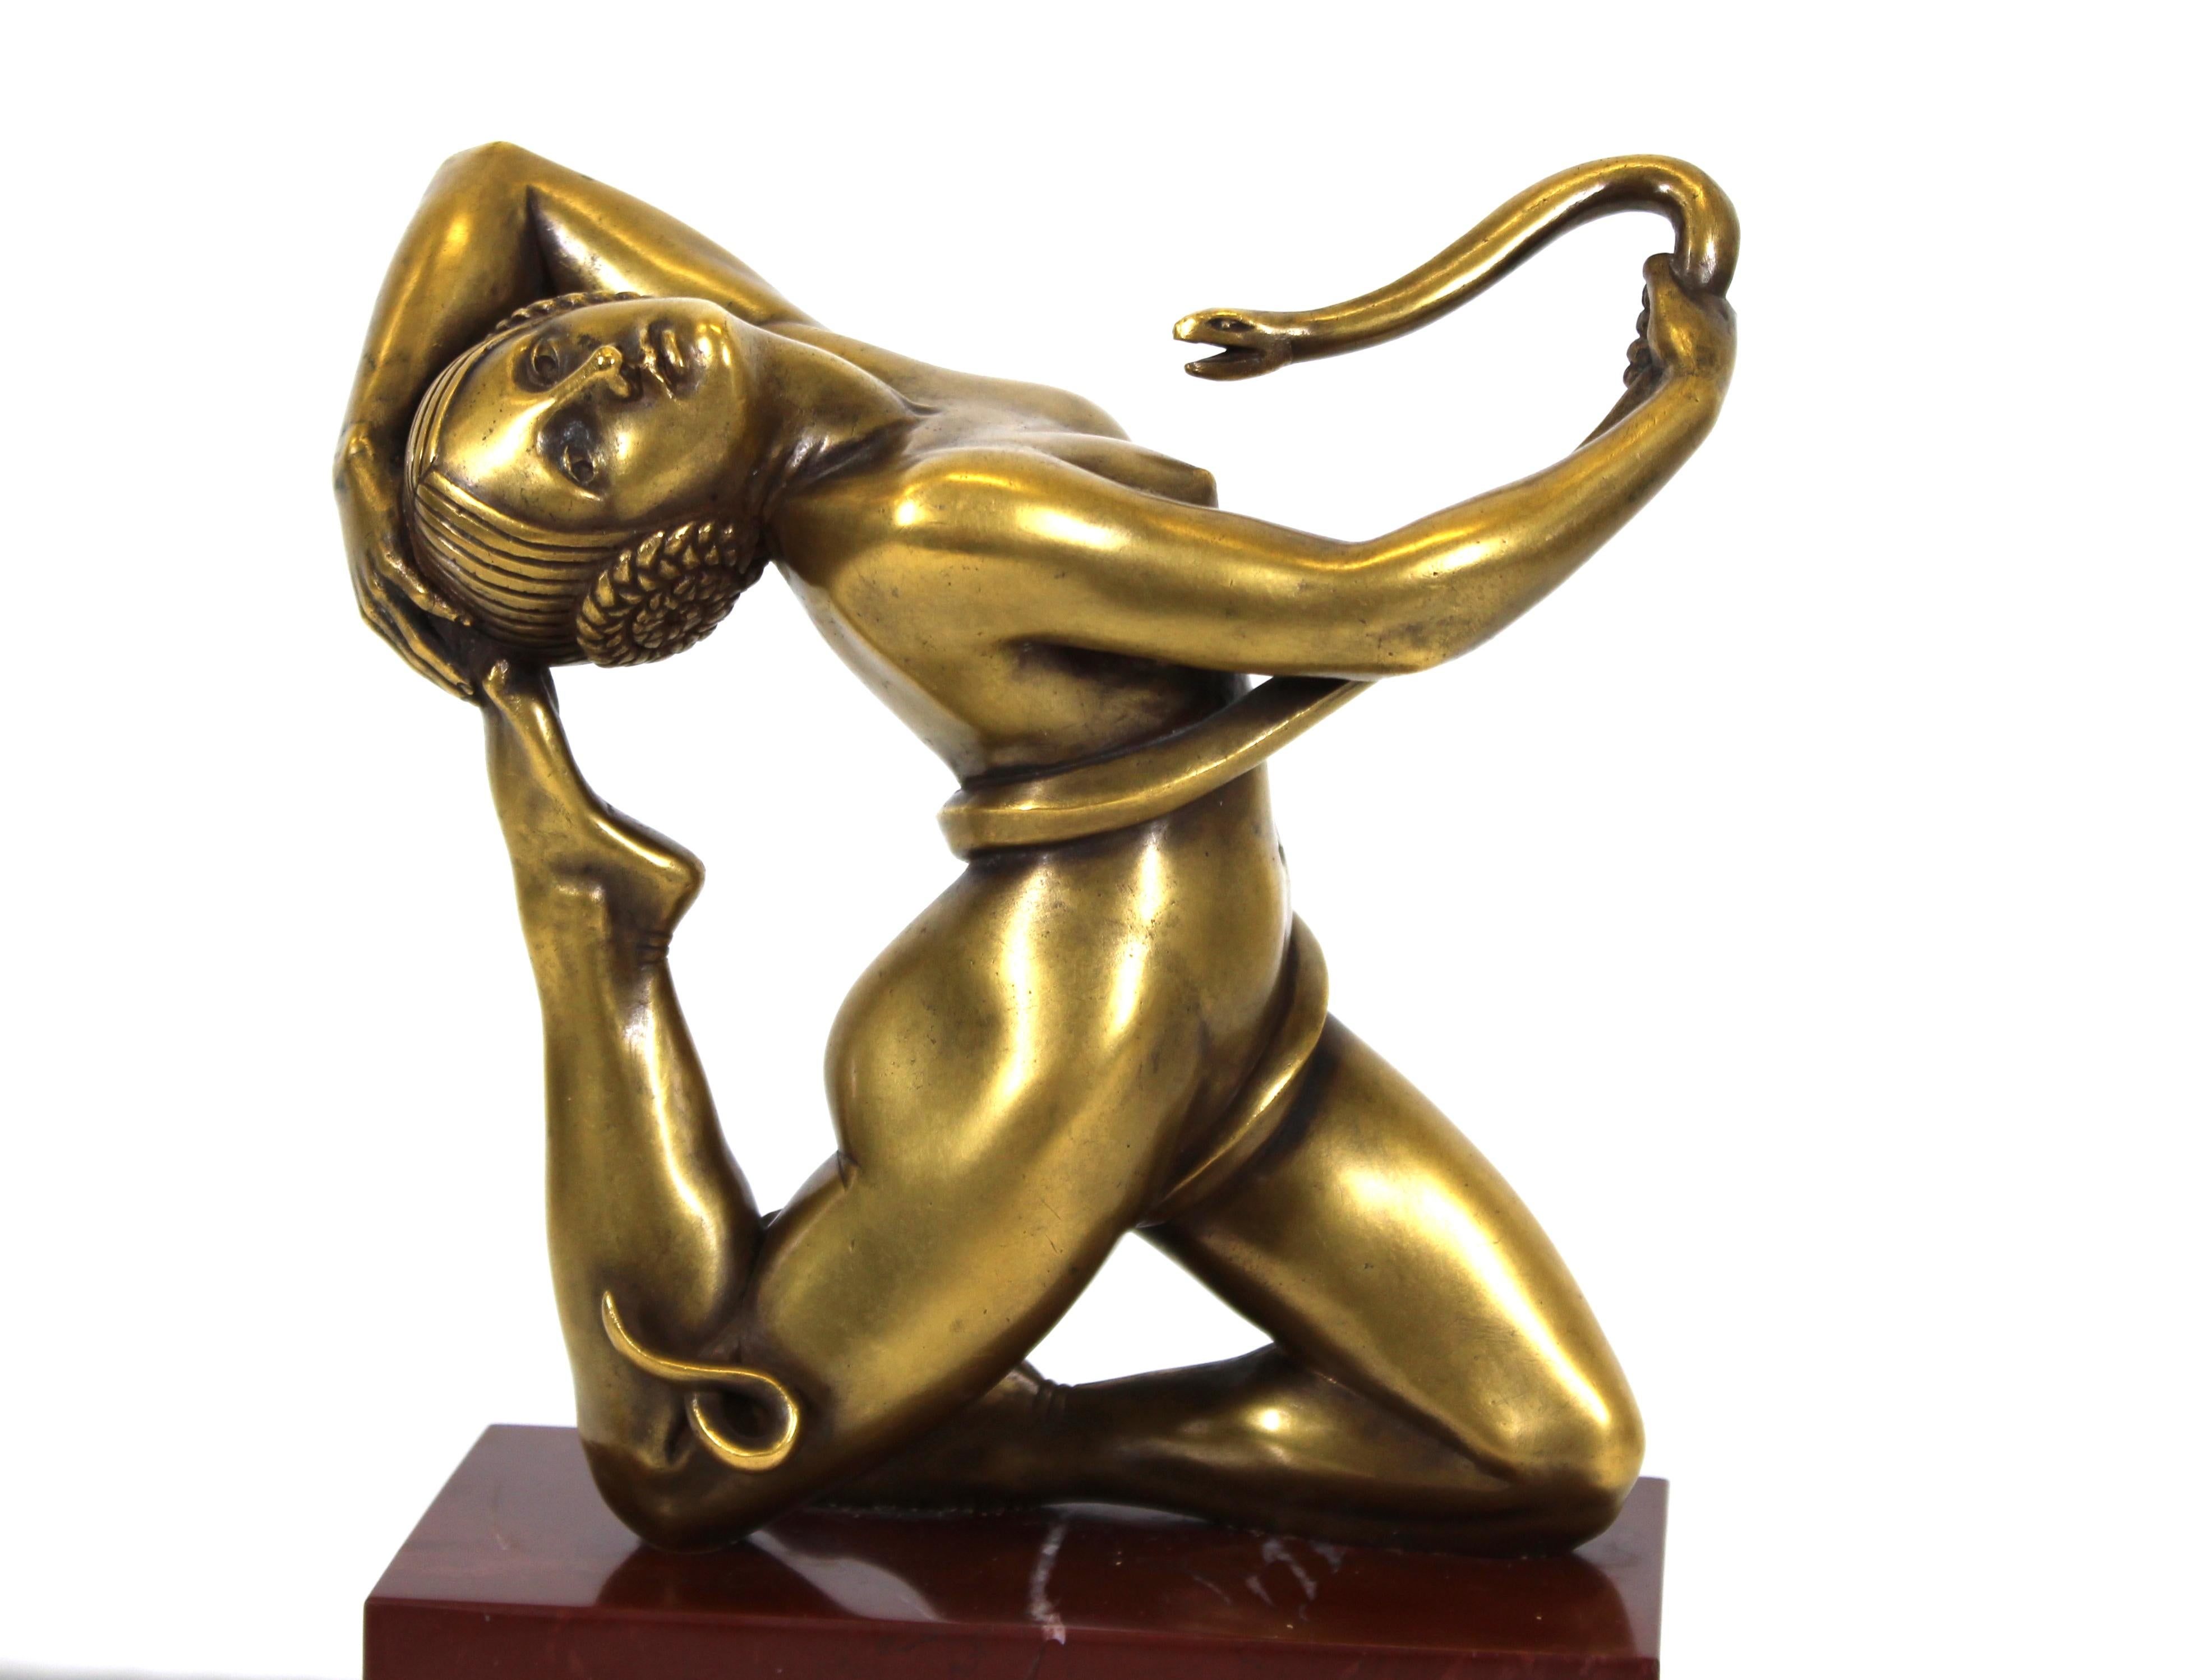 French Art Deco bronze tabletop sculpture of a snake charming nude woman mounted on a red veined marble base with incised Egyptian and Greek Revival elements. The piece is signed 'Paul Piel' and dated 1925 on the lower lip of the base. Partial old